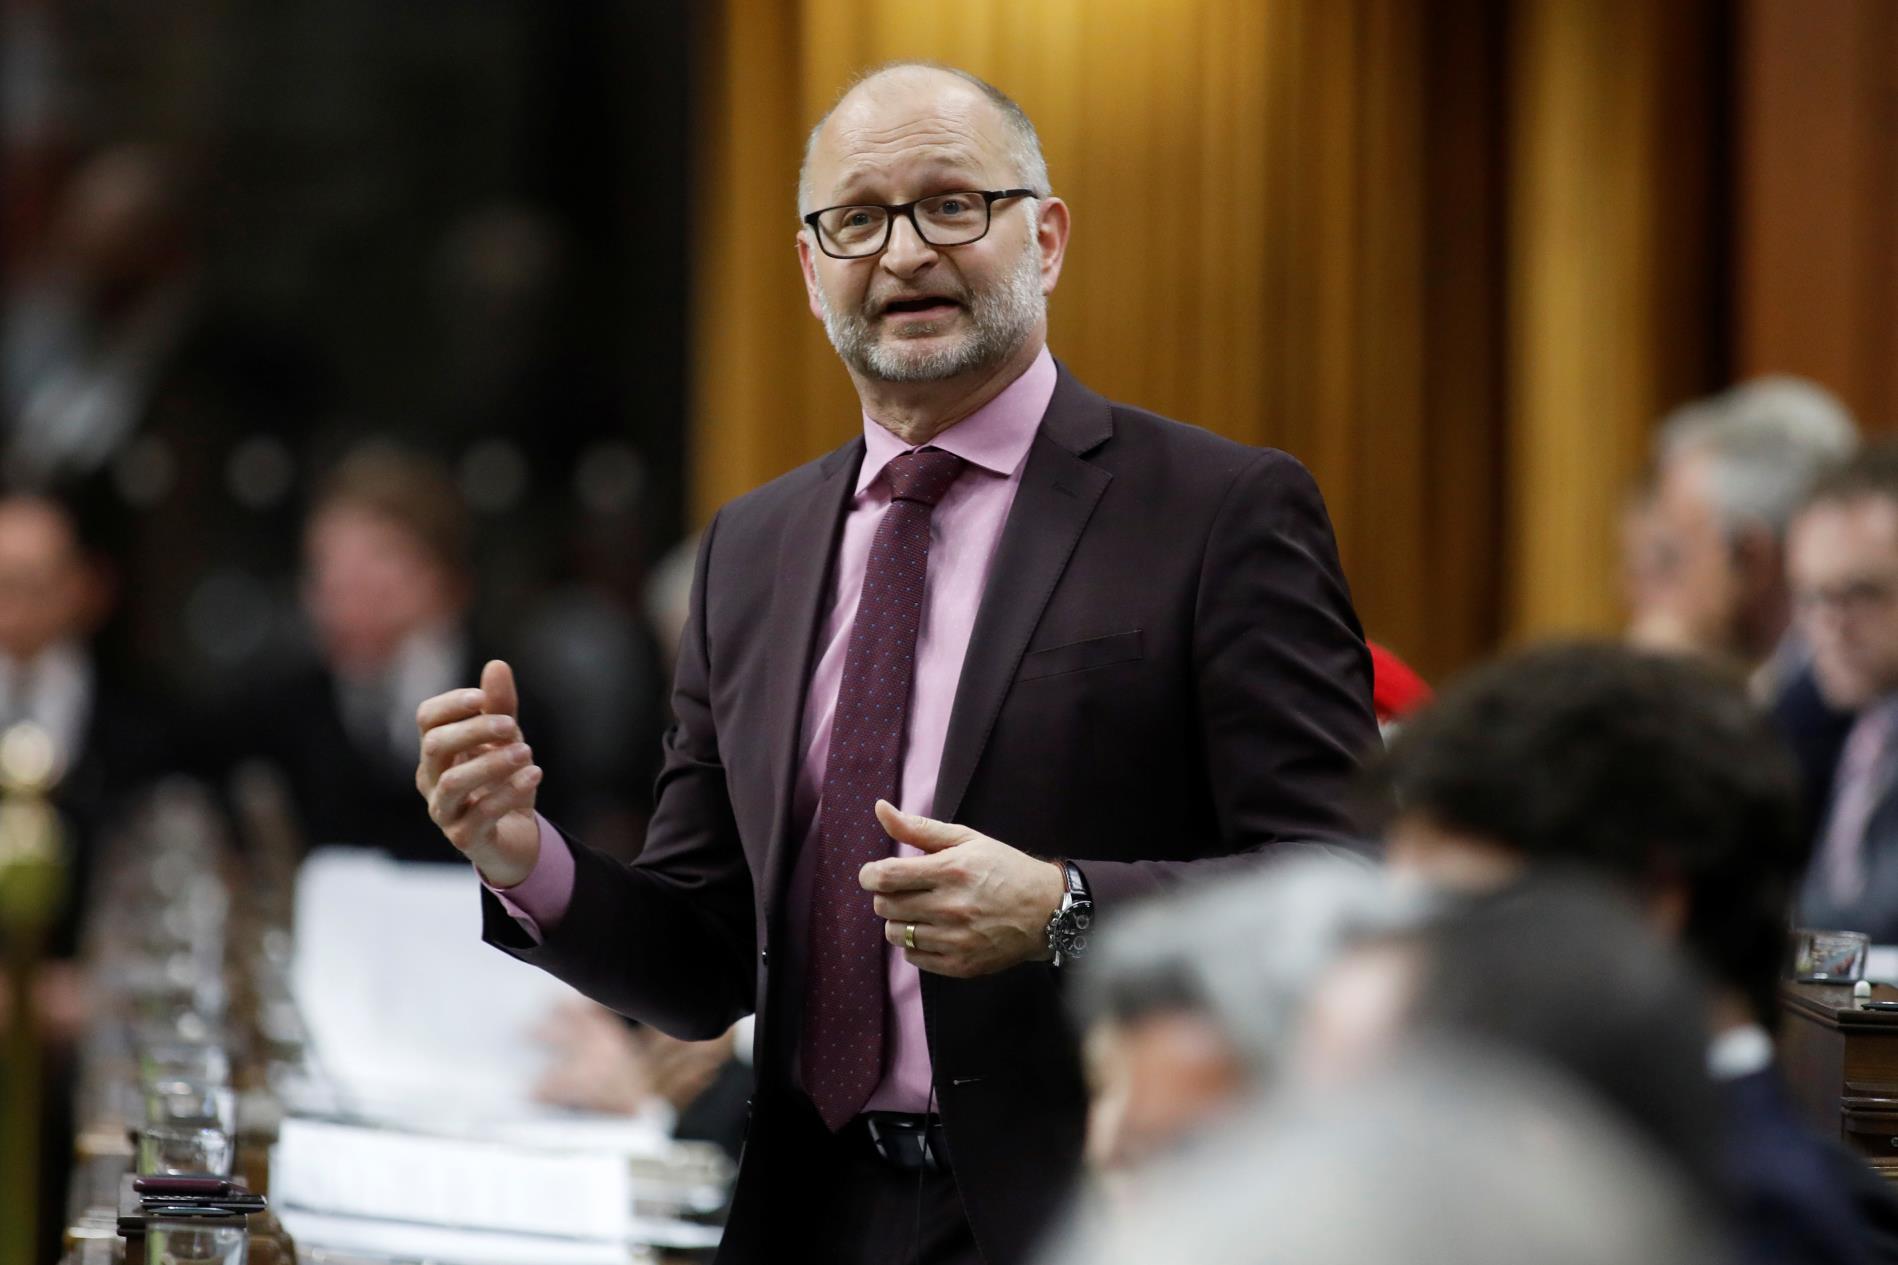 Canada's Minister of Justice and Attorney General of Canada David Lametti speaks during Question Period in the House of Commons on Parliament Hill in Ottawa, Ontario, Canada January 27, 2020. REUTERS/Blair Gable